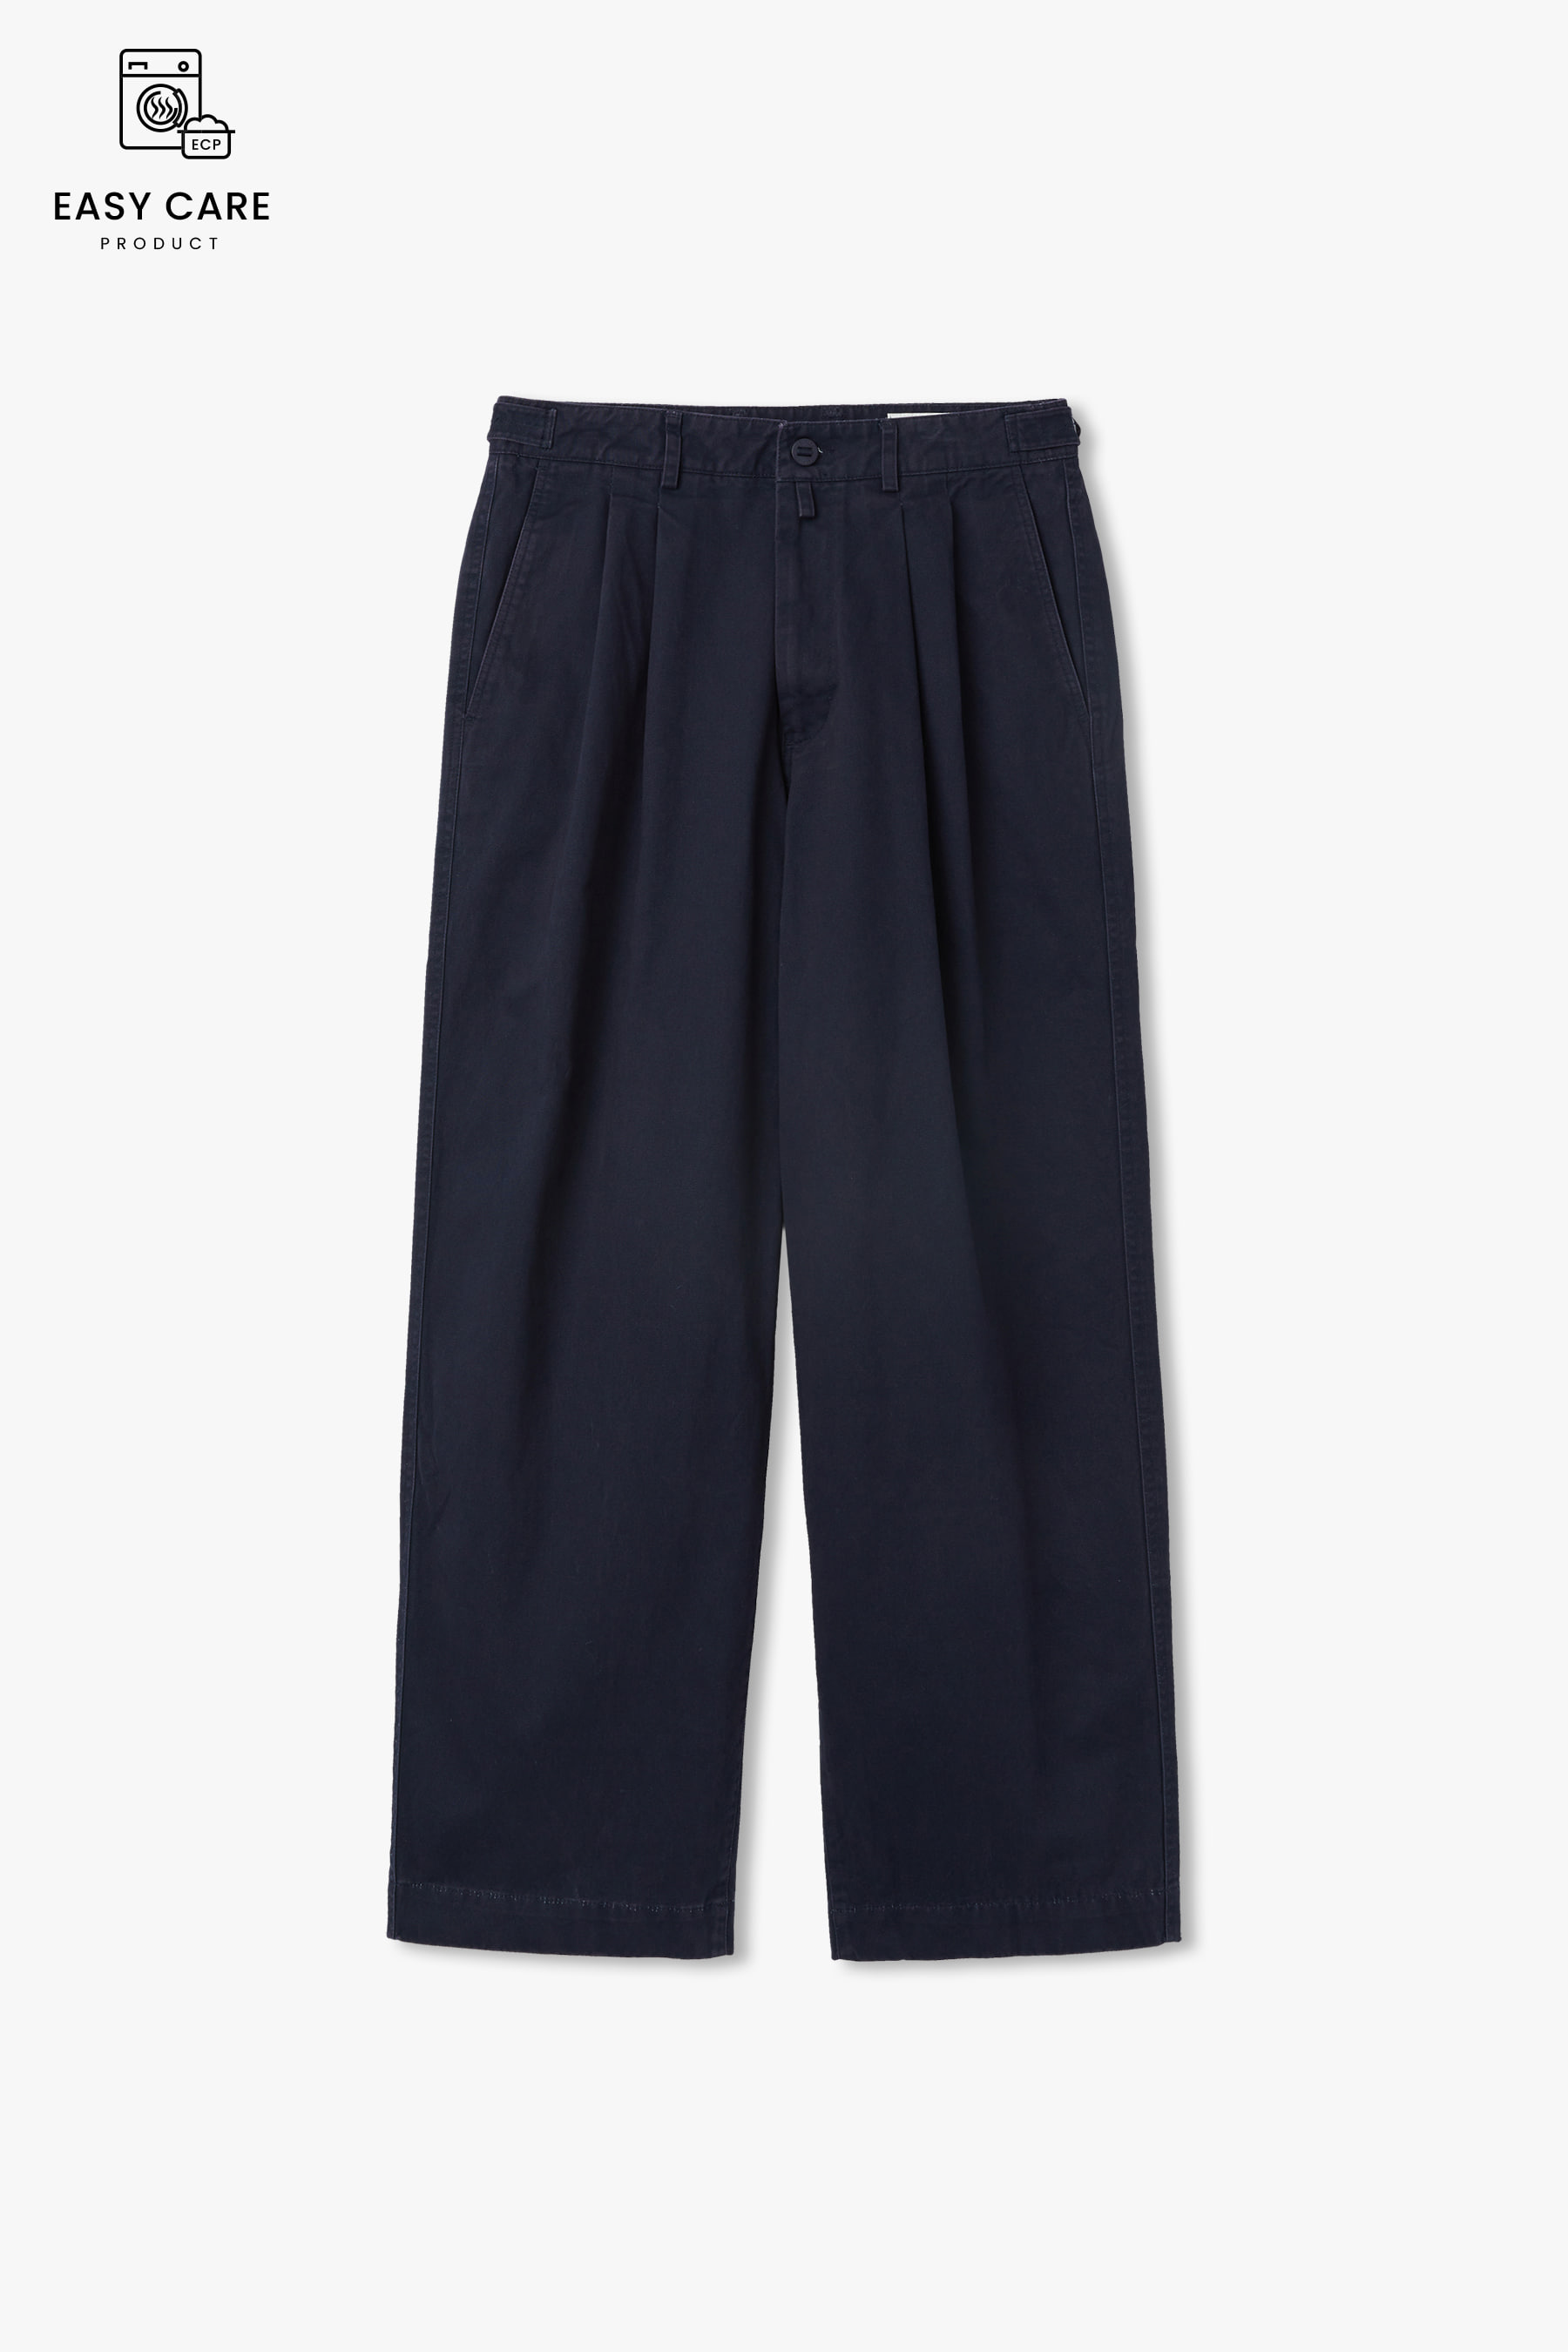 DUSTY NAVY SOFT FLUFF COTTON YRS Y-550 WASHED WIDE CHINO PANTS (ECP GARMENT PROCESS)